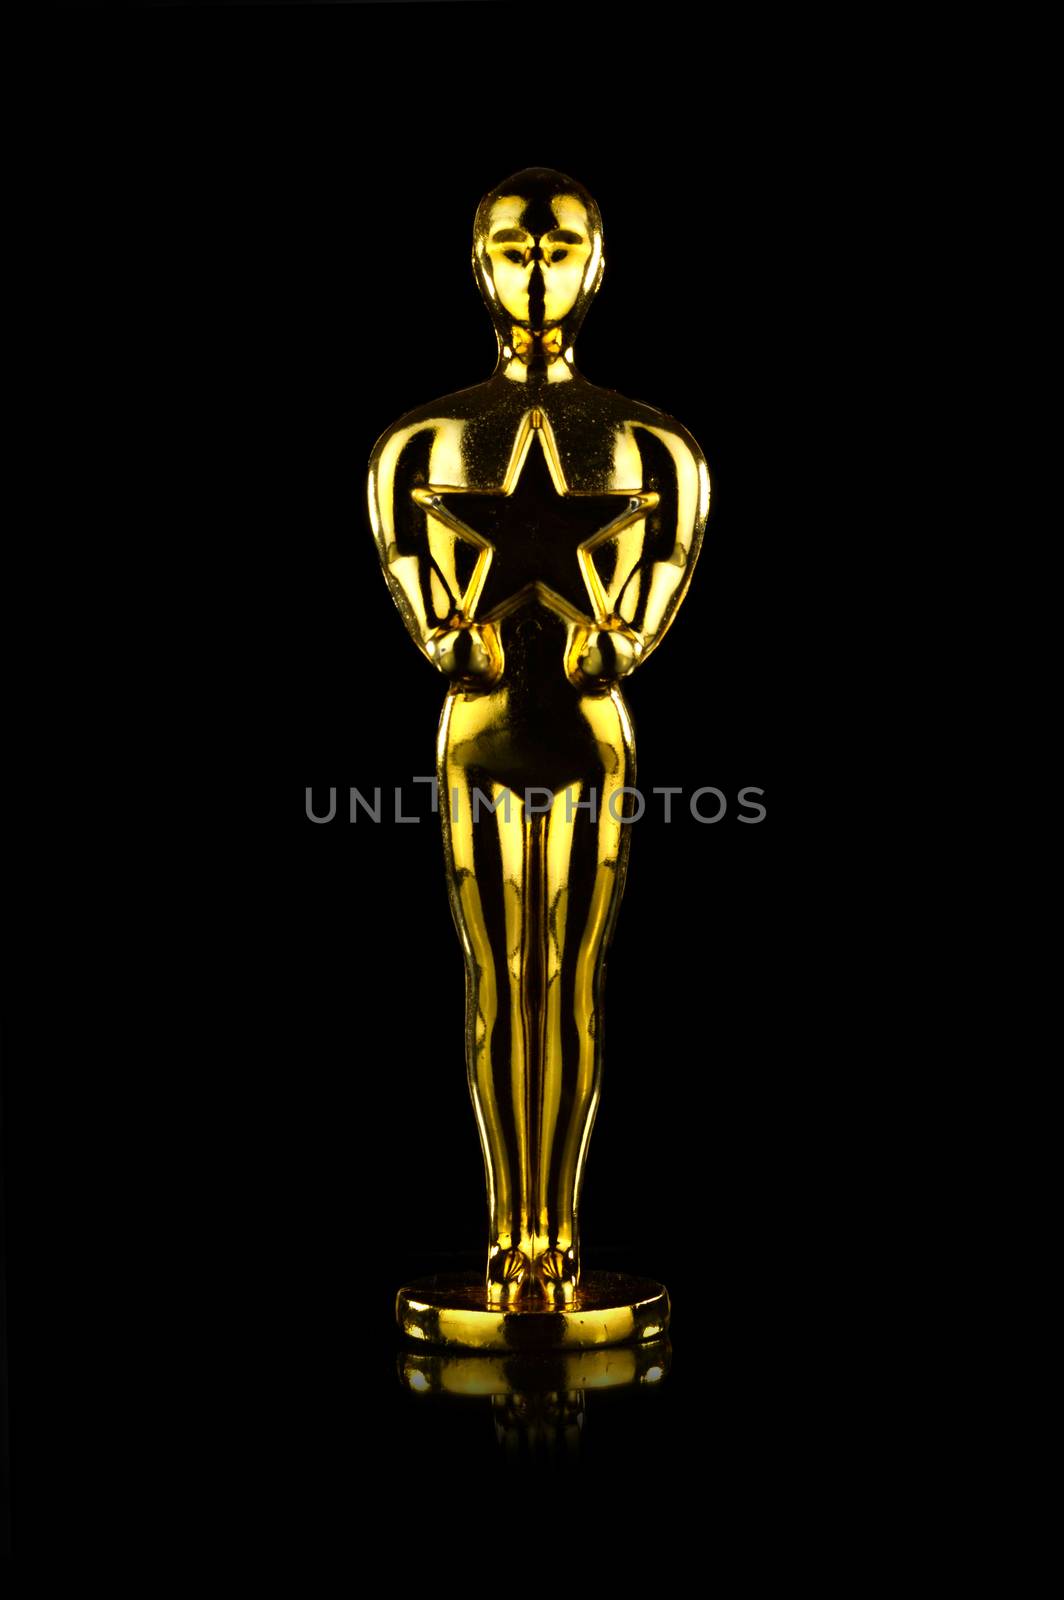 An isolated over black background image of a gold star awarded trophy.